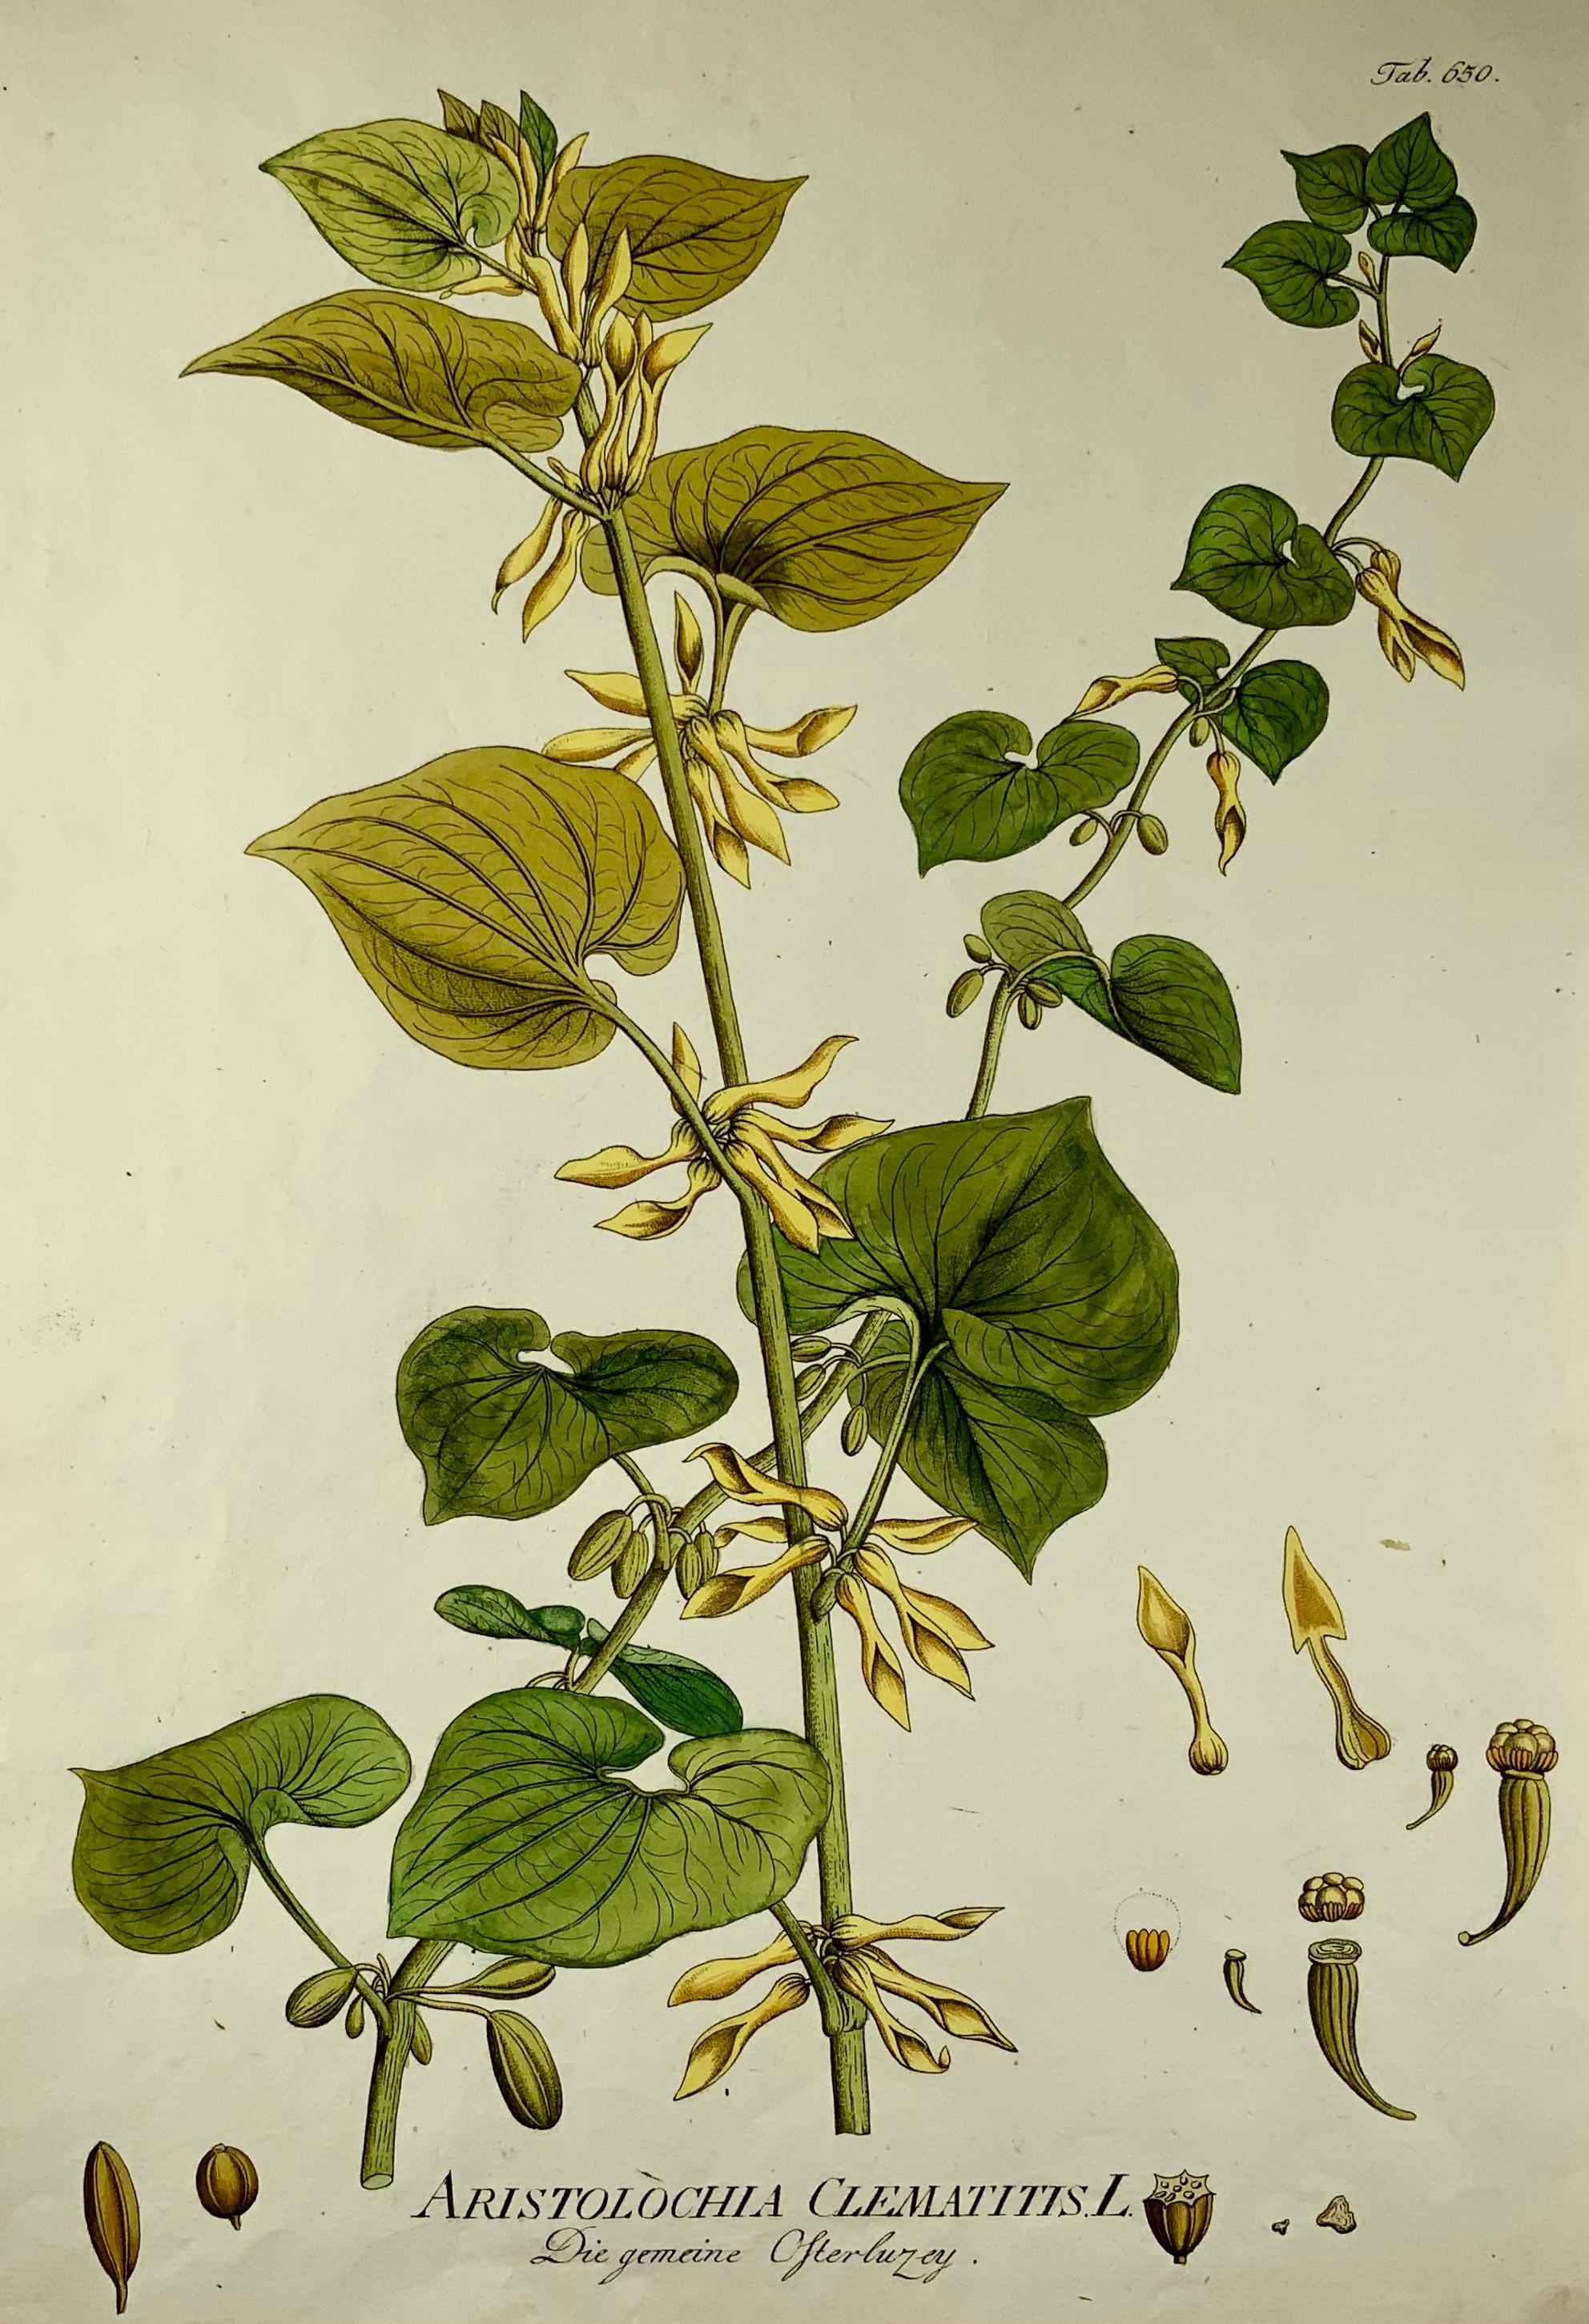 Aristolochia Clematitis, Birthwort

Aristolochia clematitis, the birthwort is a twining herbaceous plant in the family Aristolochiaceae, which is native to Europe. The leaves are heart shaped and the flowers are pale yellow and tubular in form. The